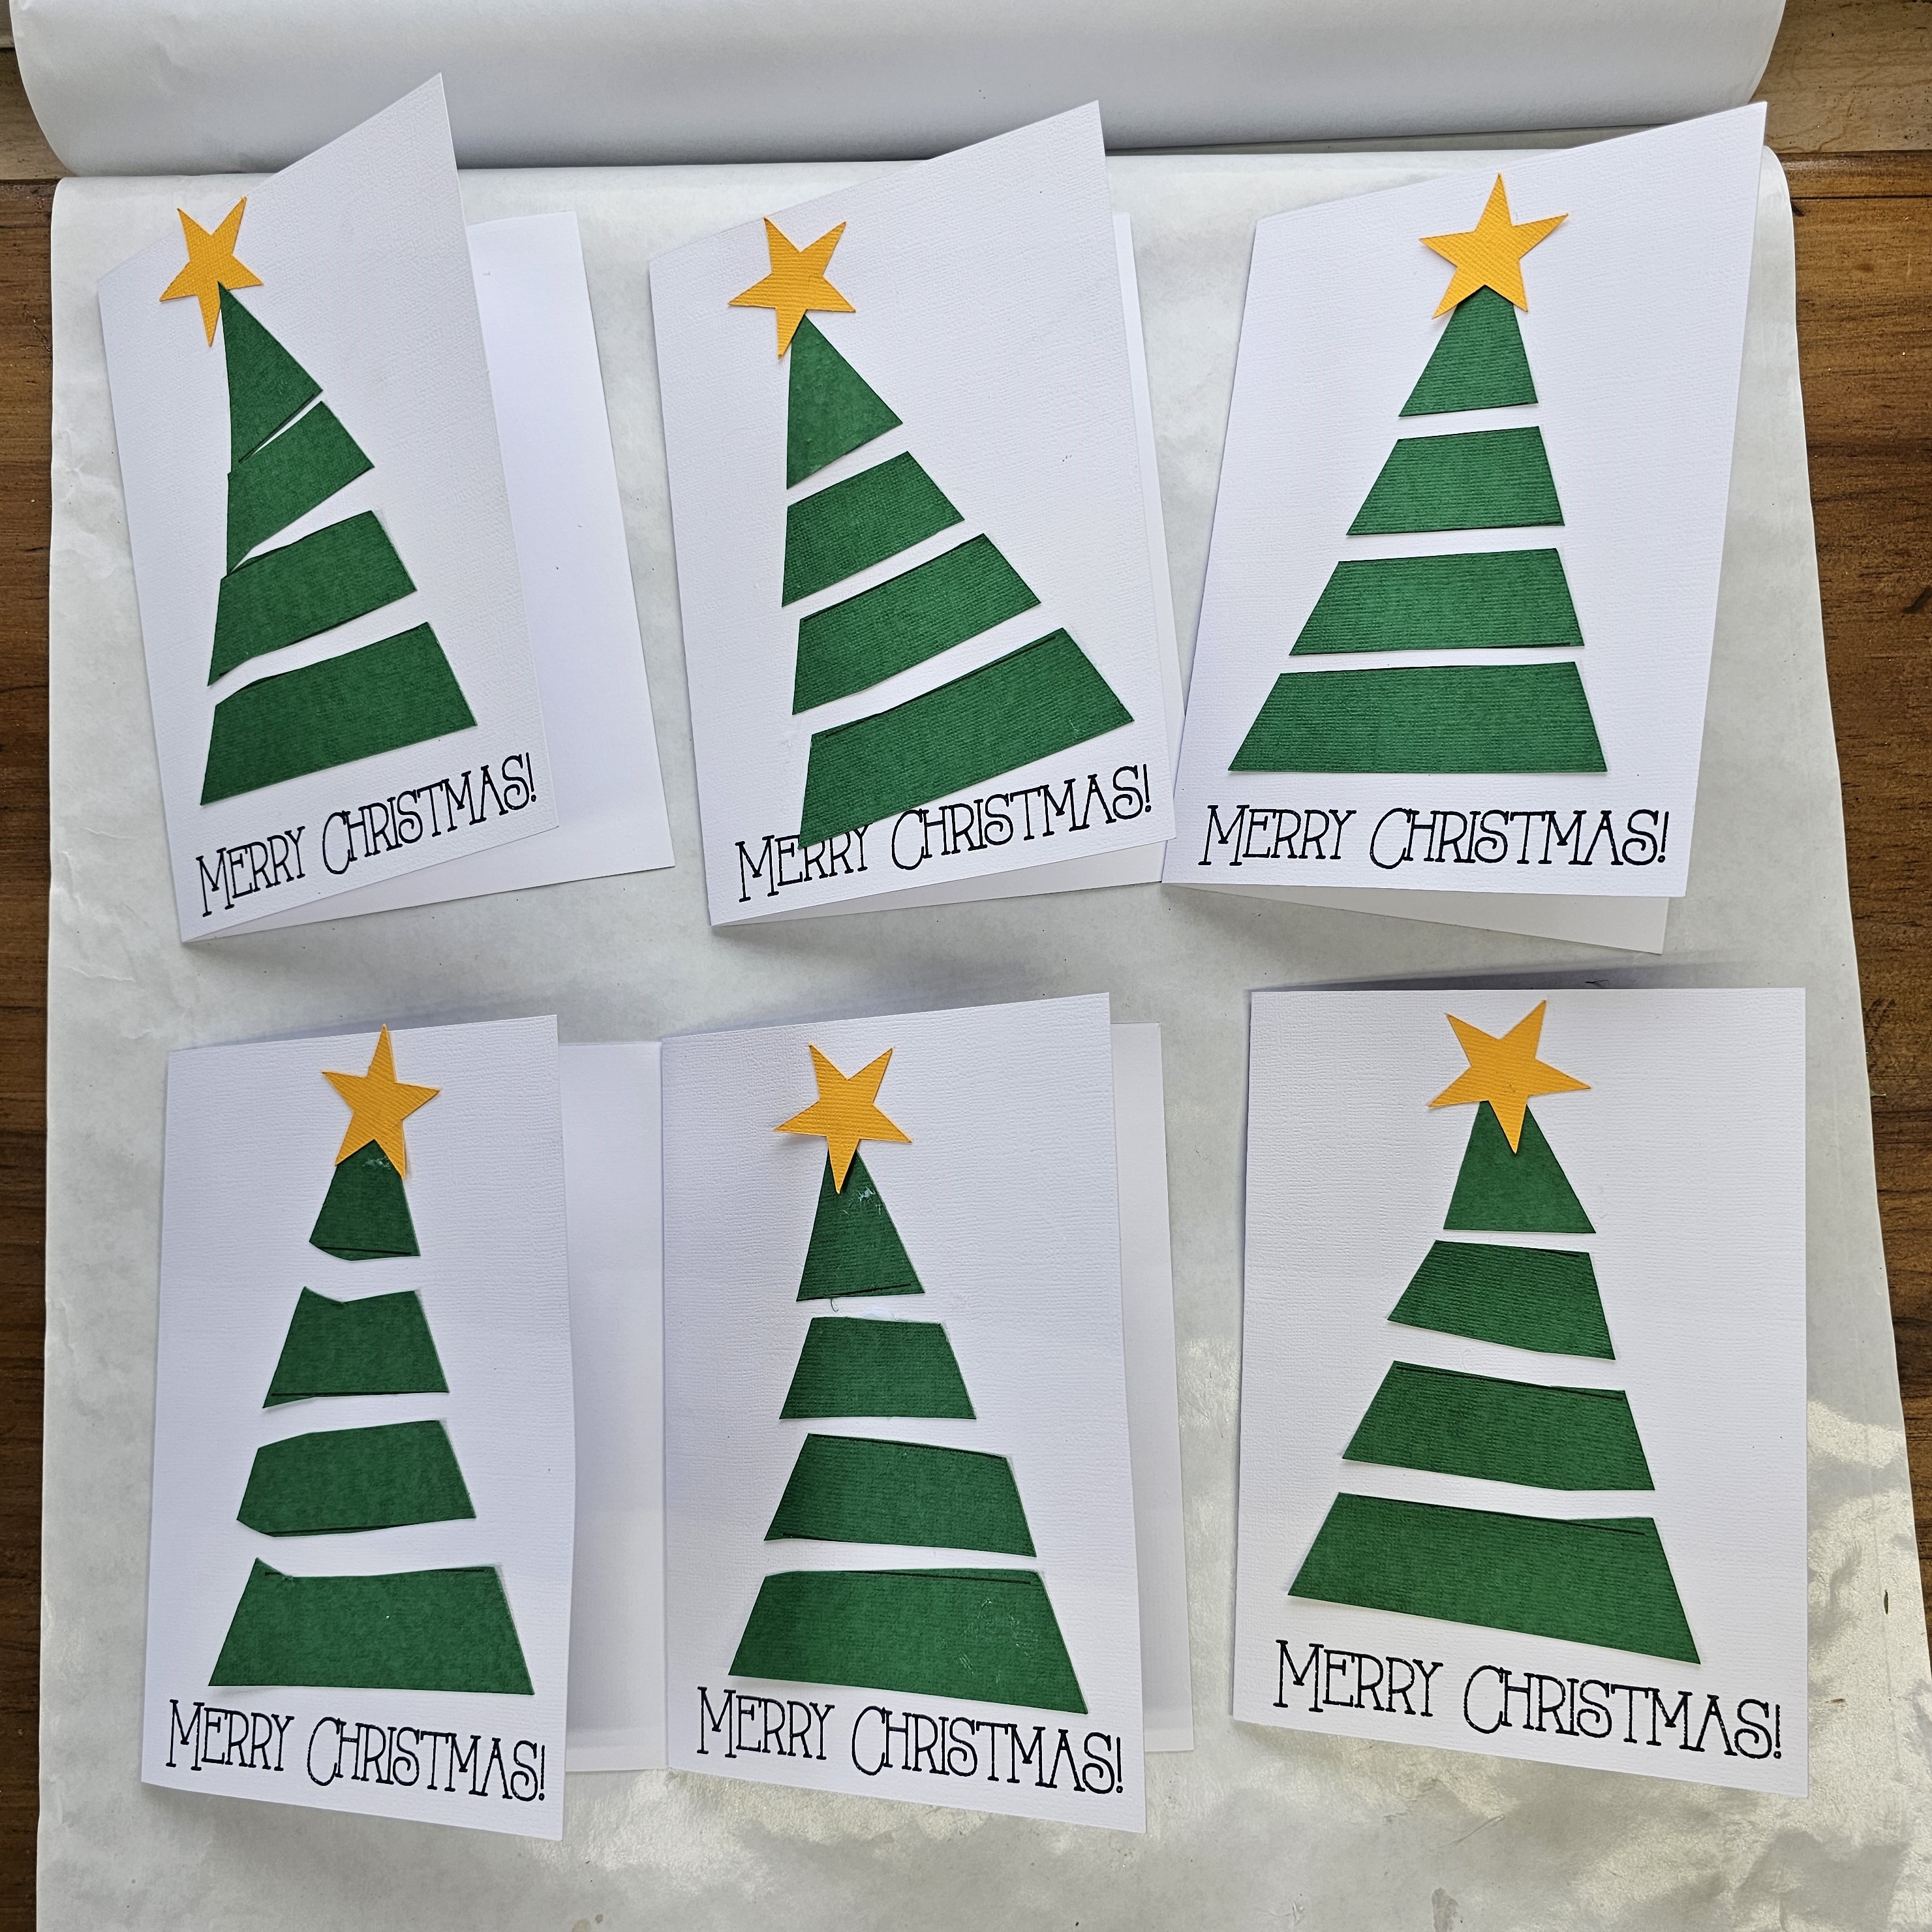 Fields Of Heather: Christmas Craft Challenge Week 7 - Glass Etching With A  Stencil Made By Cricut